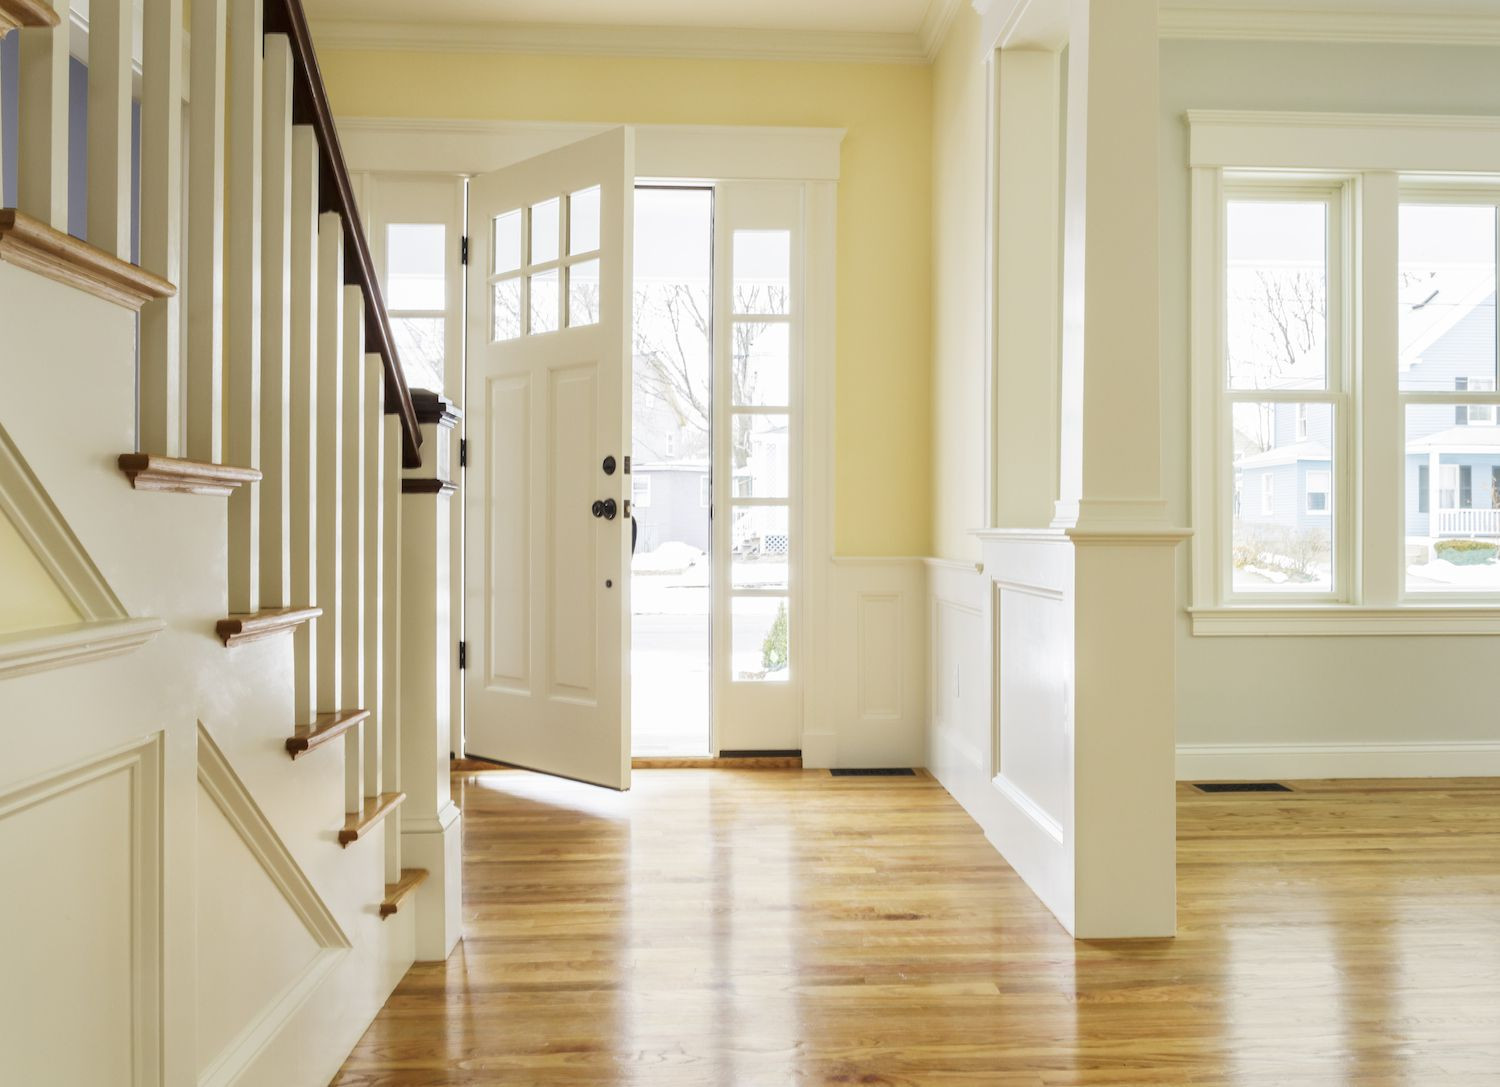 26 Lovely Hardwood Floor Direction Hallway 2024 free download hardwood floor direction hallway of is a staircase facing the front door bad feng shui in open entry david papazian g 56a2e22f3df78cf7727aed19